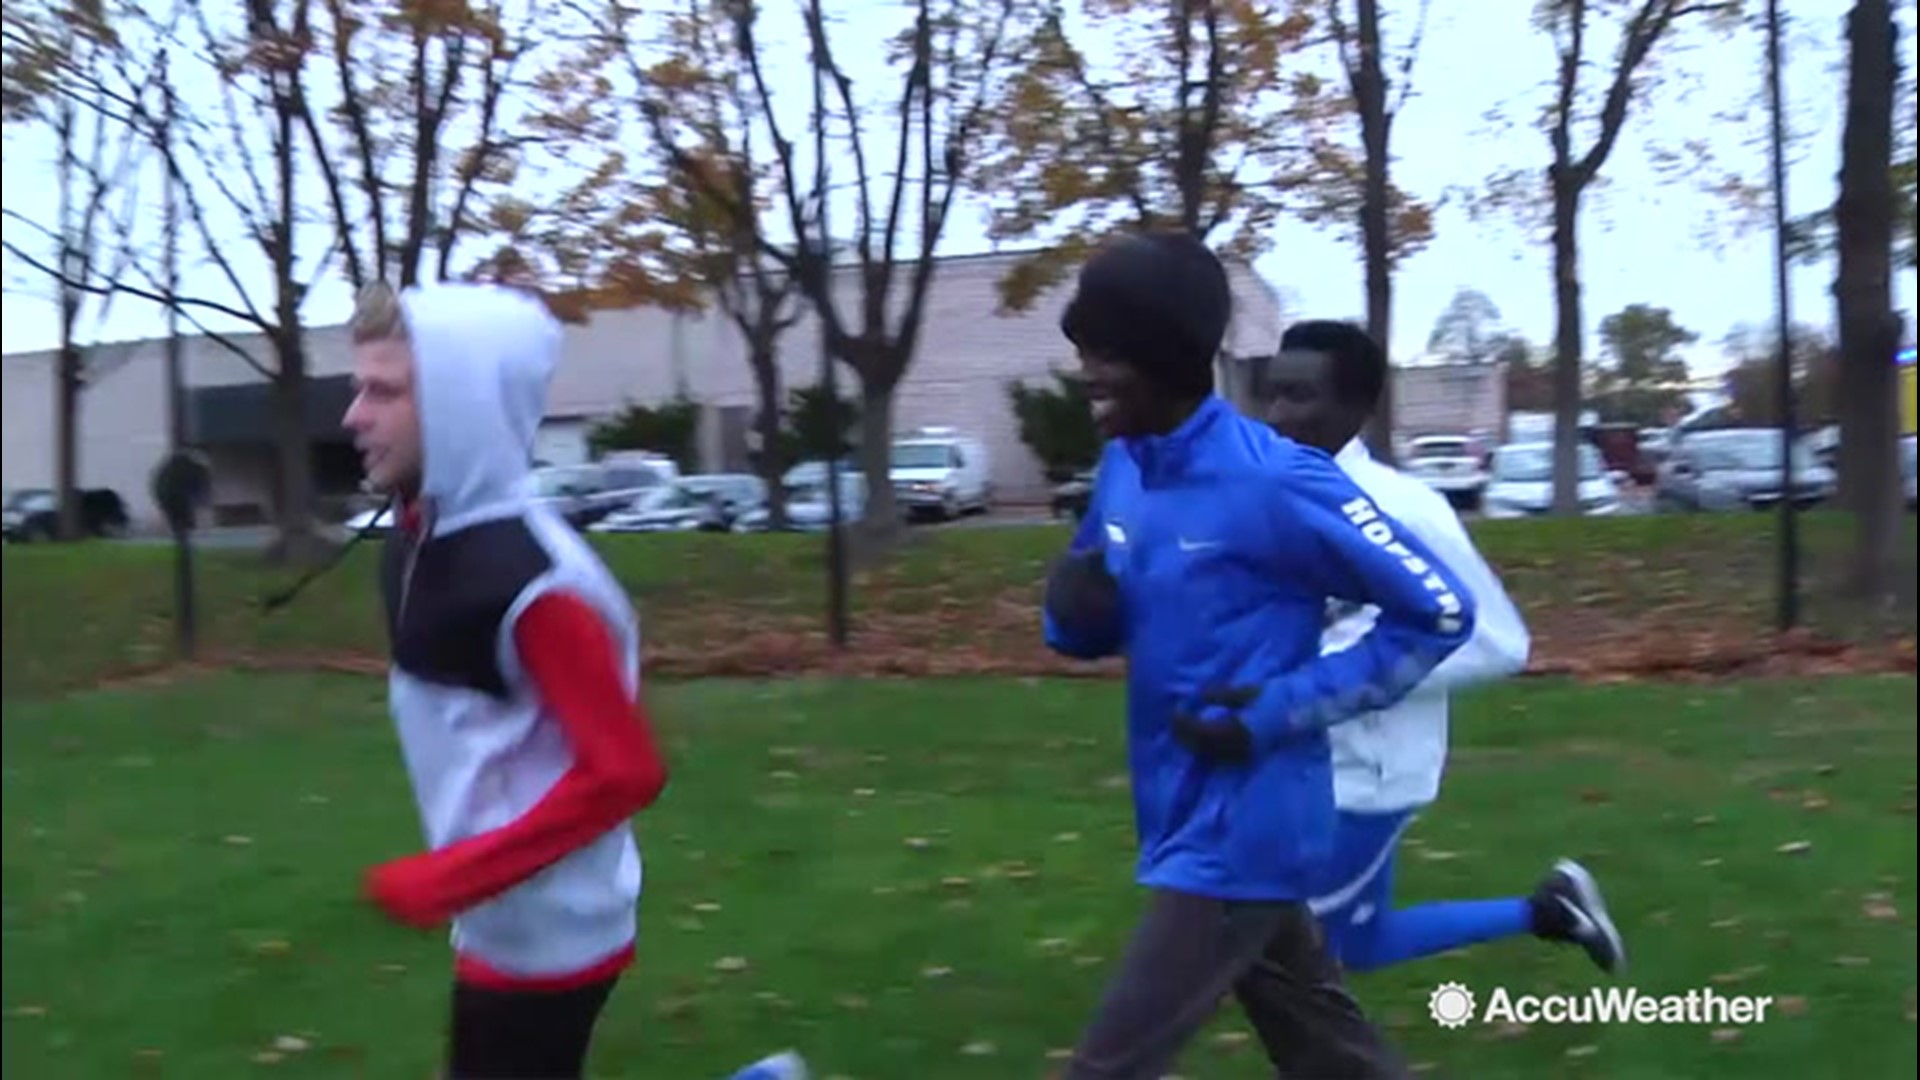 AccuWeather's Dexter Henry visited the campus of Hofstra University, in Long Island, New York, where two Kenyan members of the school's cross country team are dealing with running in cold Northeast temperatures.